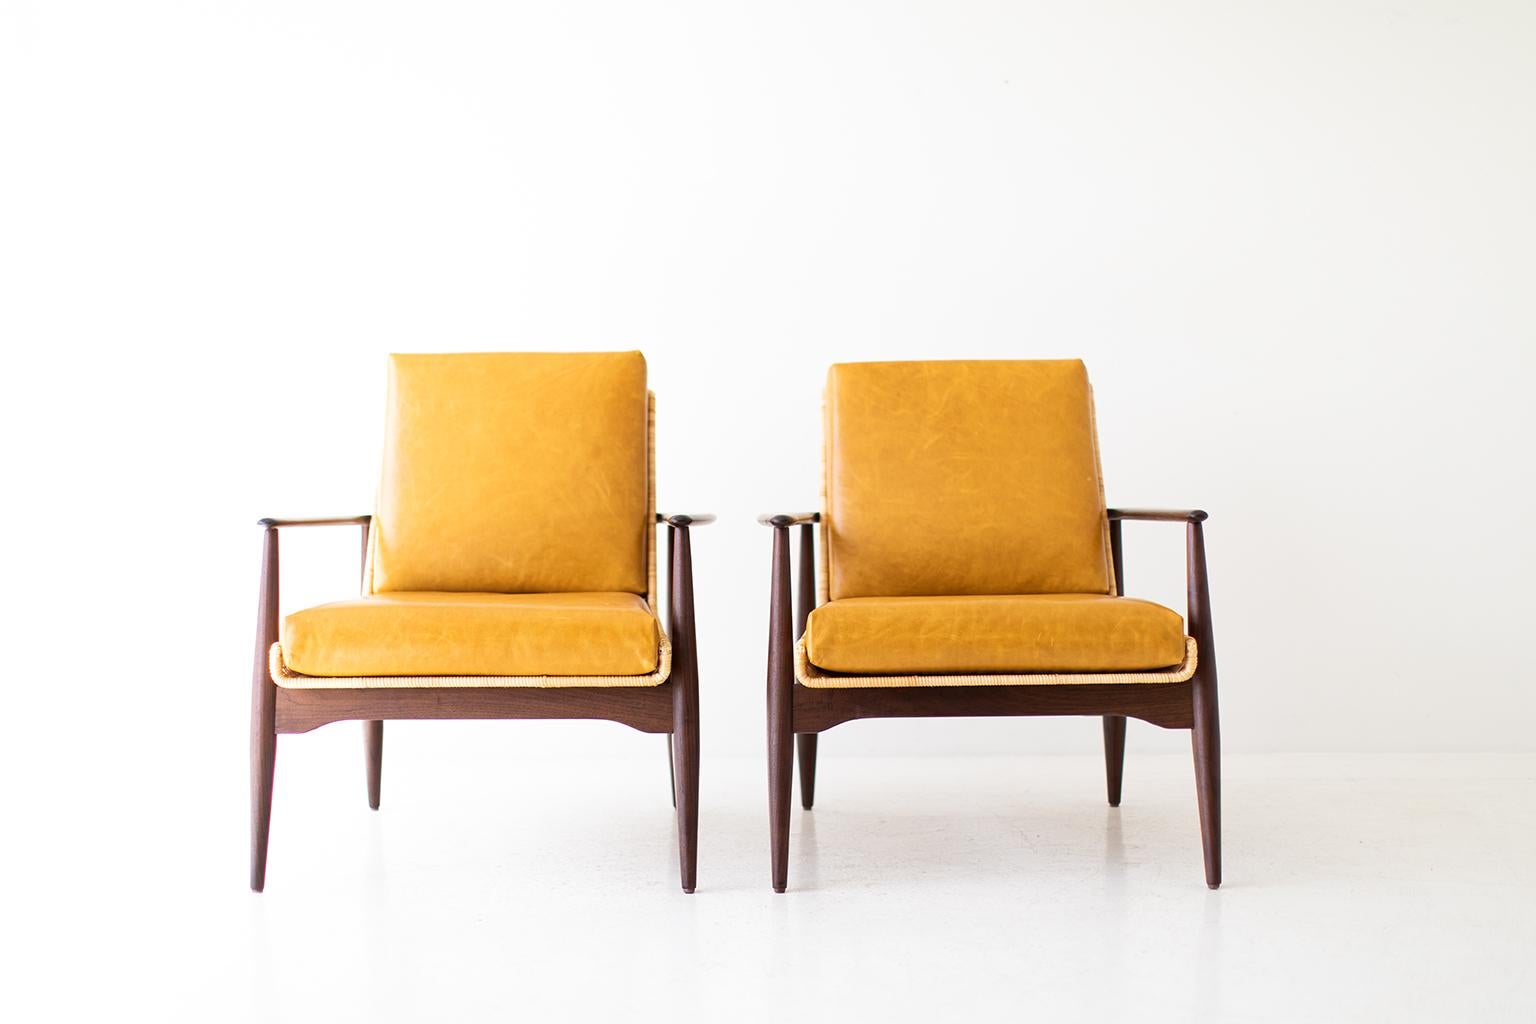 20th Century Peabody Wicker Lounge Chairs, Gold Fabric and Walnut, Craft Associates  For Sale